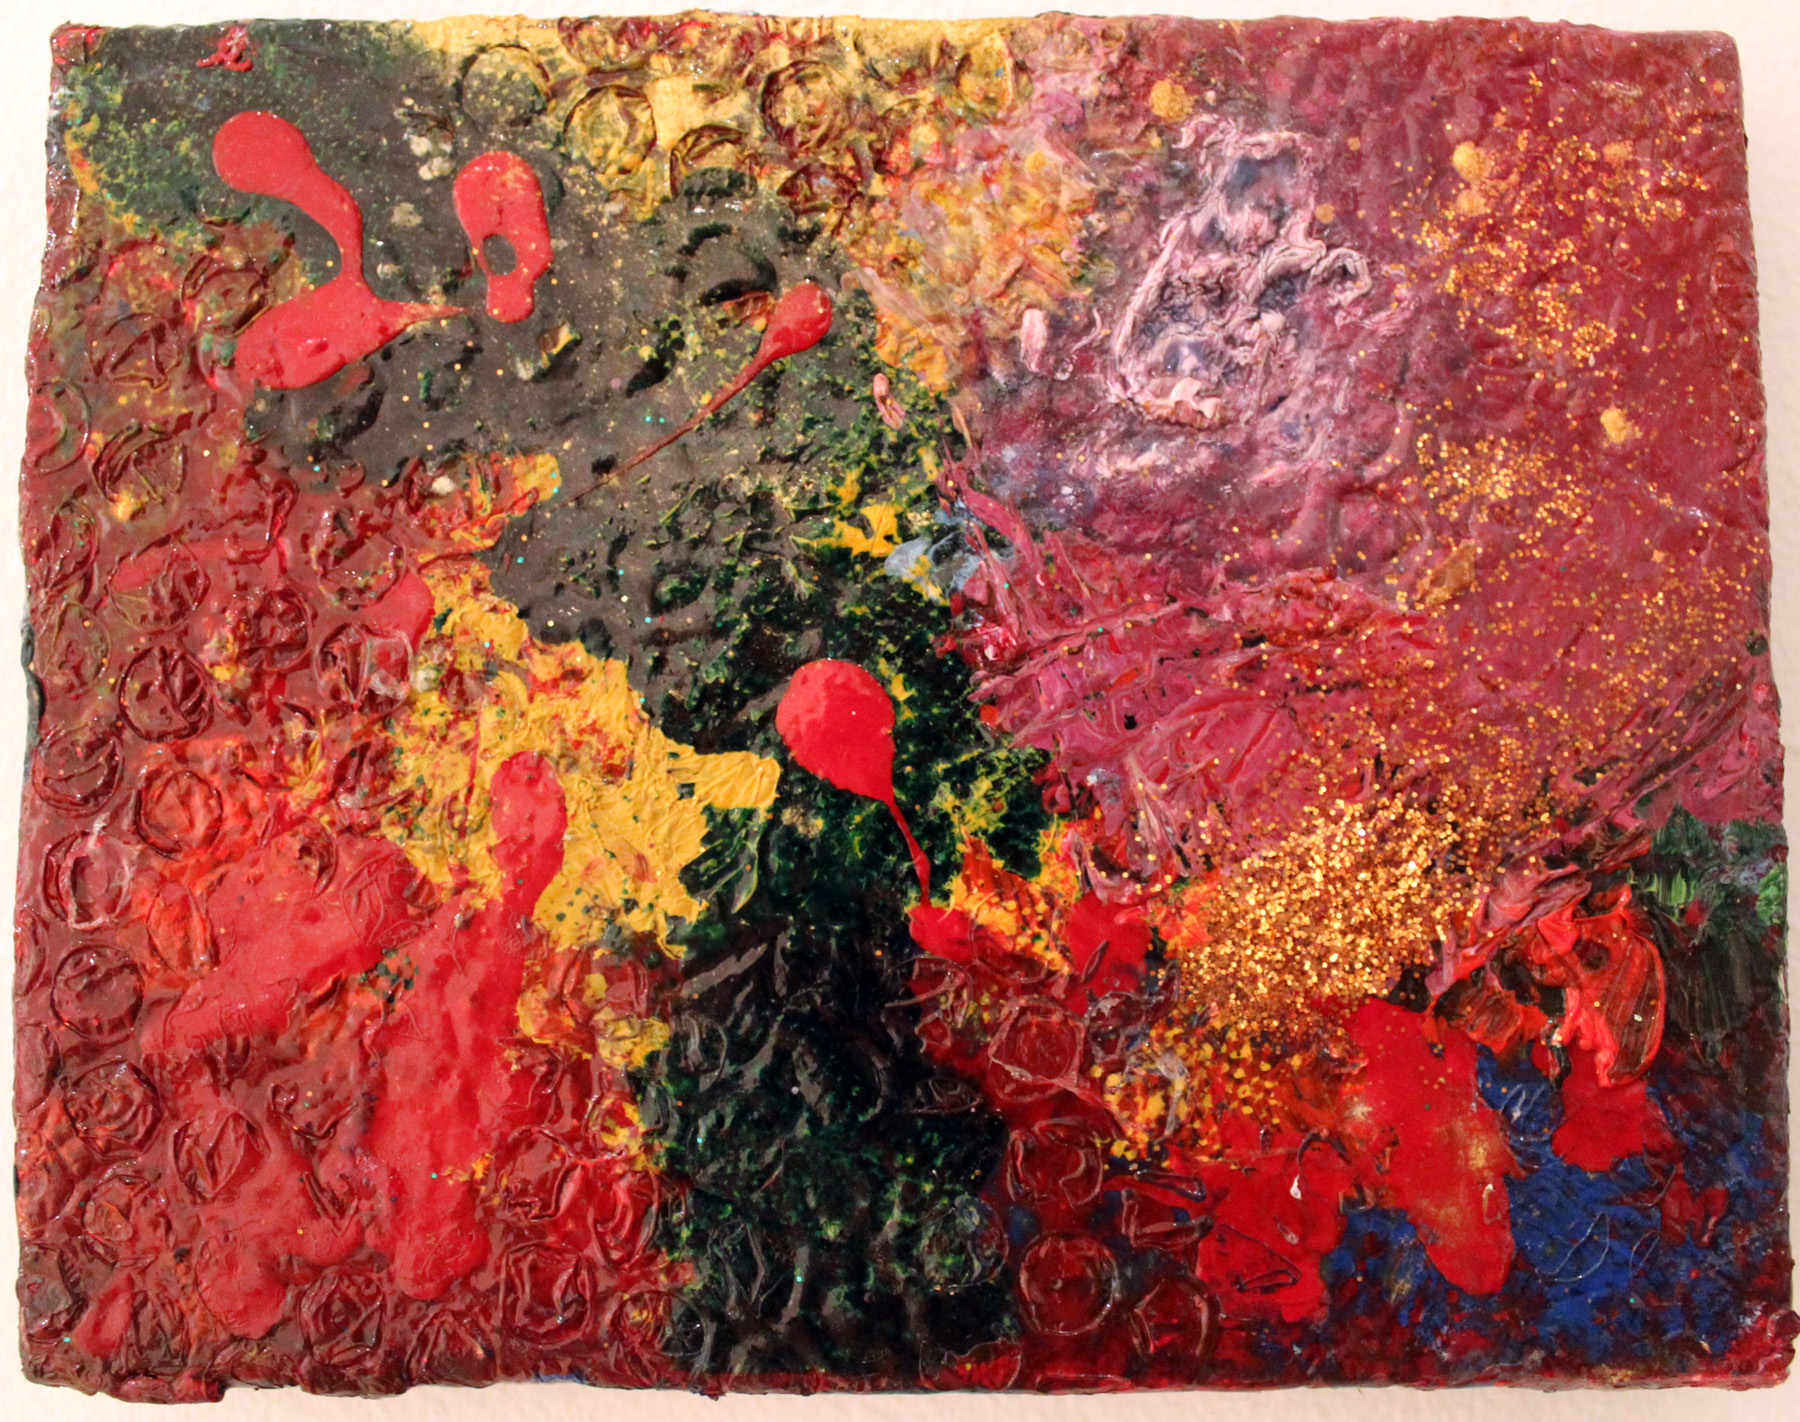  &nbsp;“untitled” 7 x 5.5 inches; Mixed Media on Canvas  multi colored abstract painting 